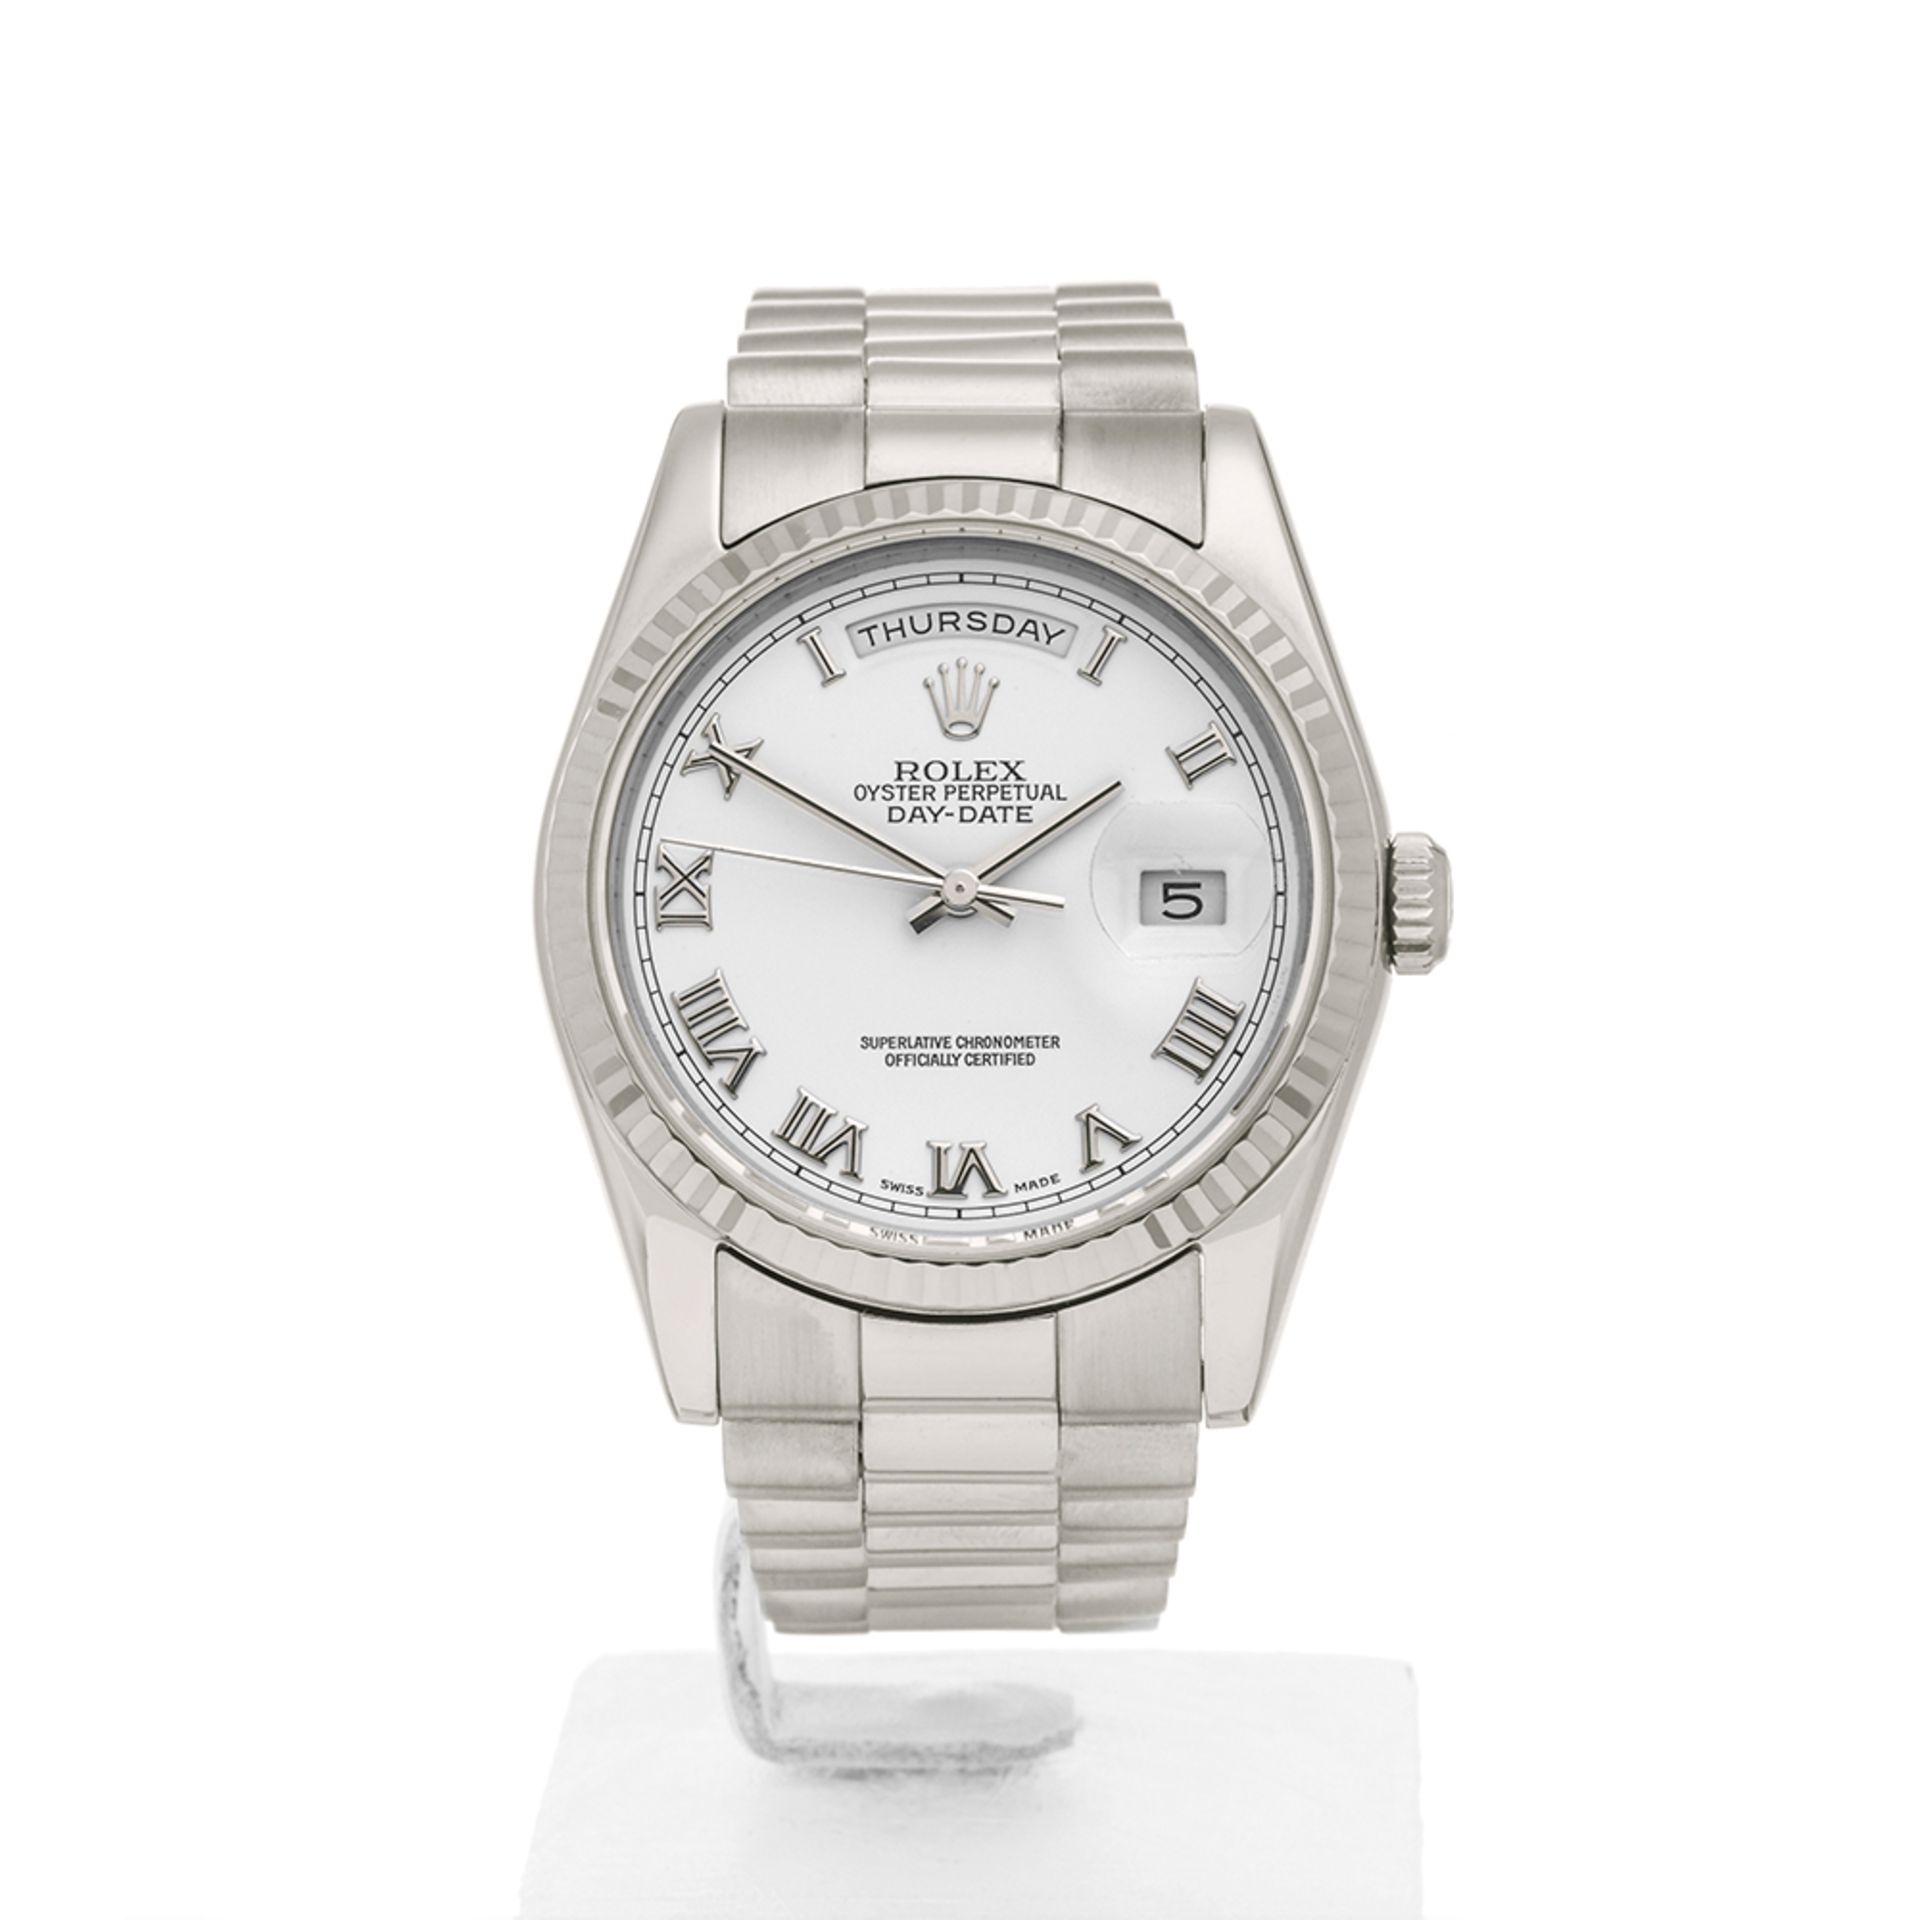 Rolex Day-Date 36mm 18k White Gold - 118239 - Image 2 of 7